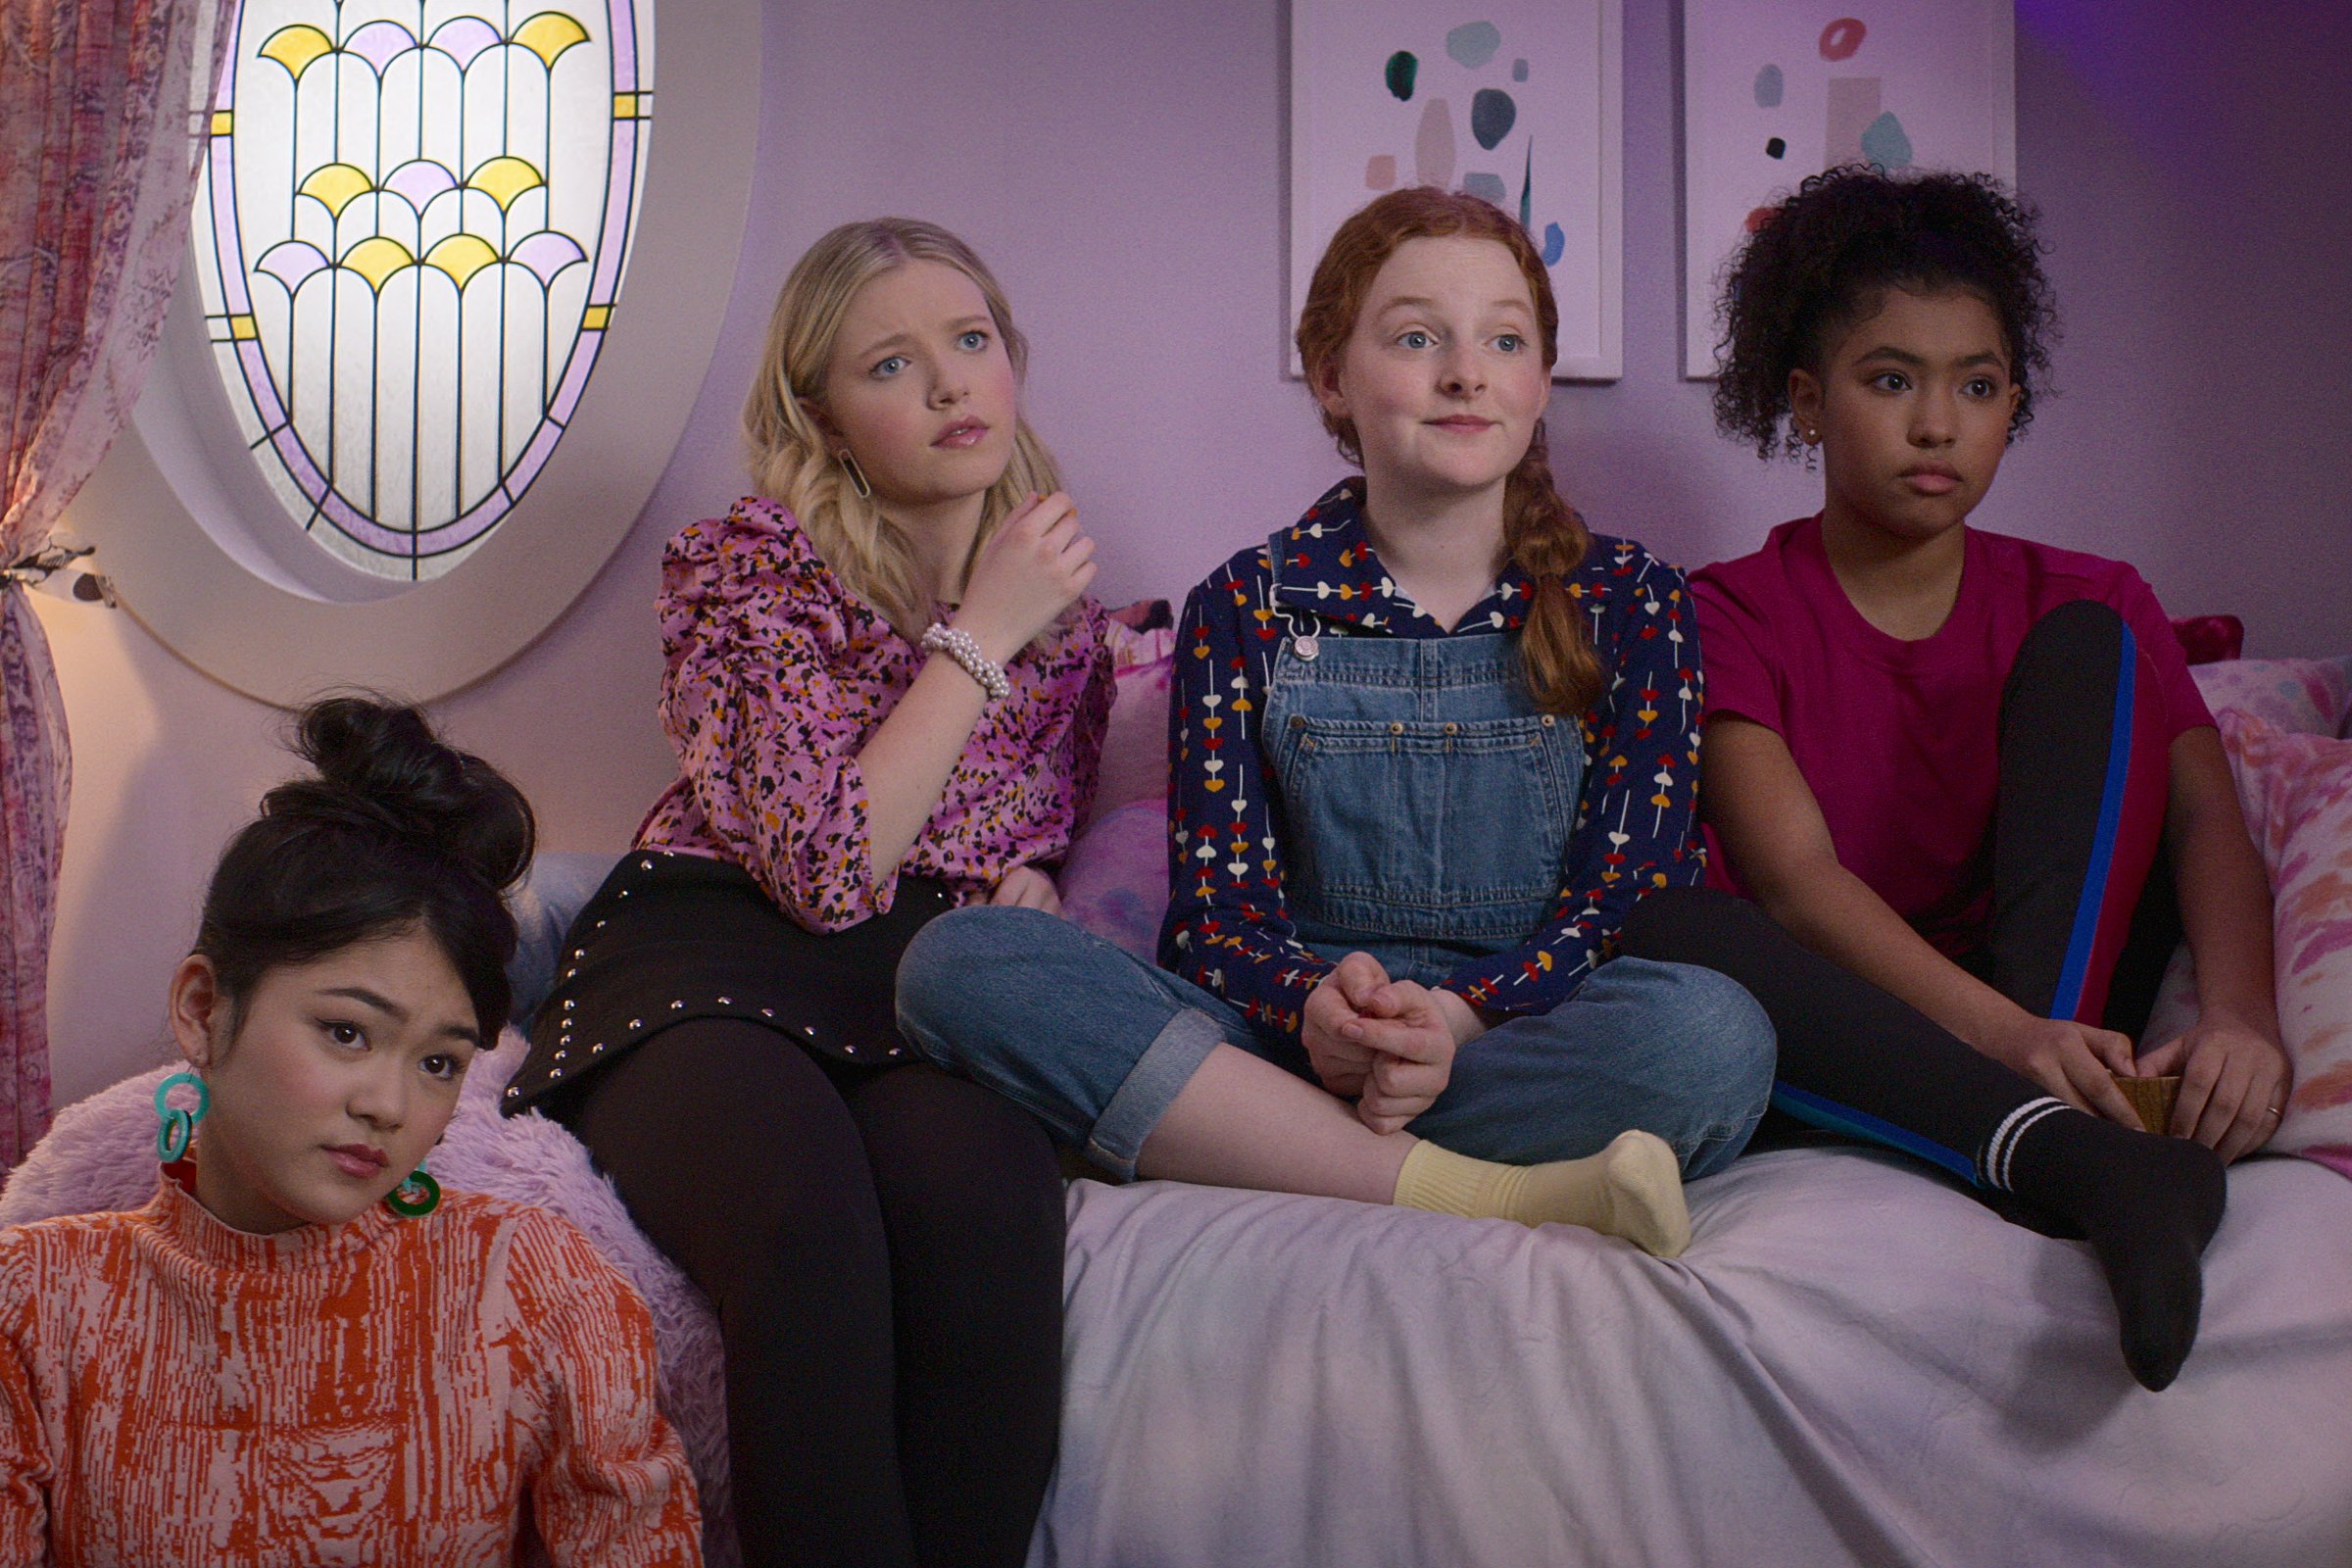 Momona Tamada, Shay Rudolph, Vivian Watson, and Anais Lee in 'The Baby-Sitter's Club,' one of Netflix's canceled shows of 2022. The four are sitting on or next to a bed and looking at something off-screen.